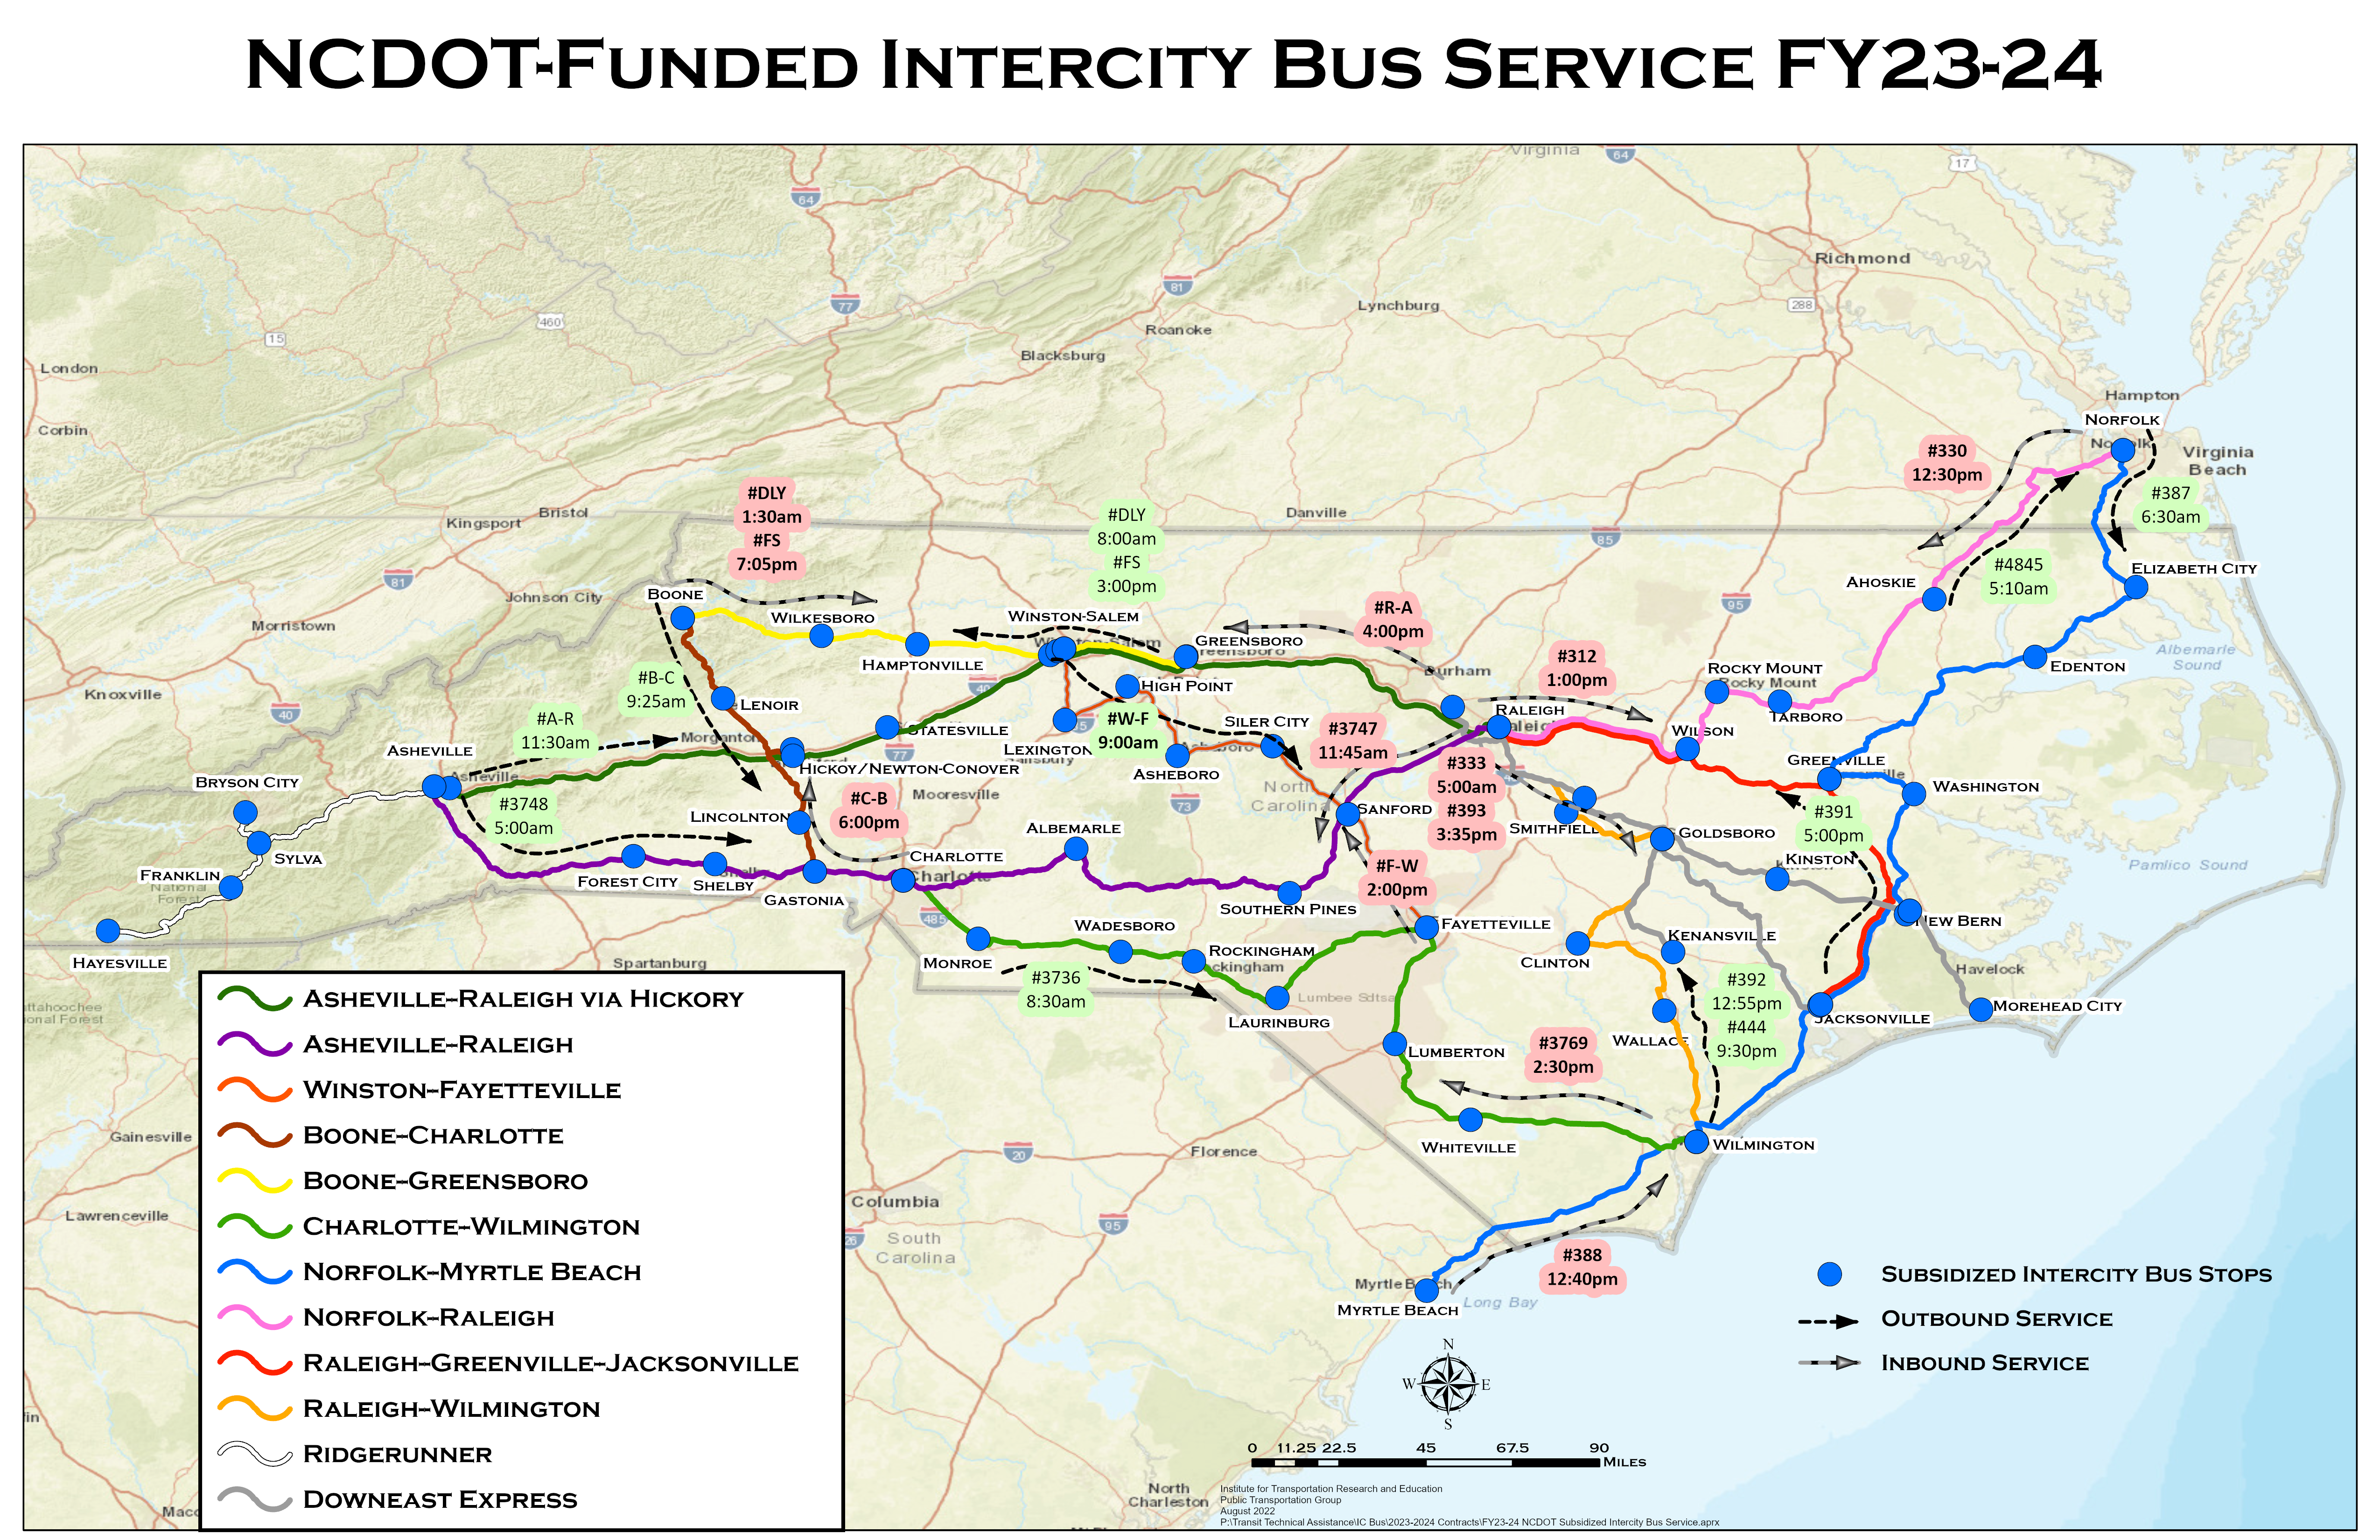 FY23 Subsidized Intercity Bus Service 20220823.png